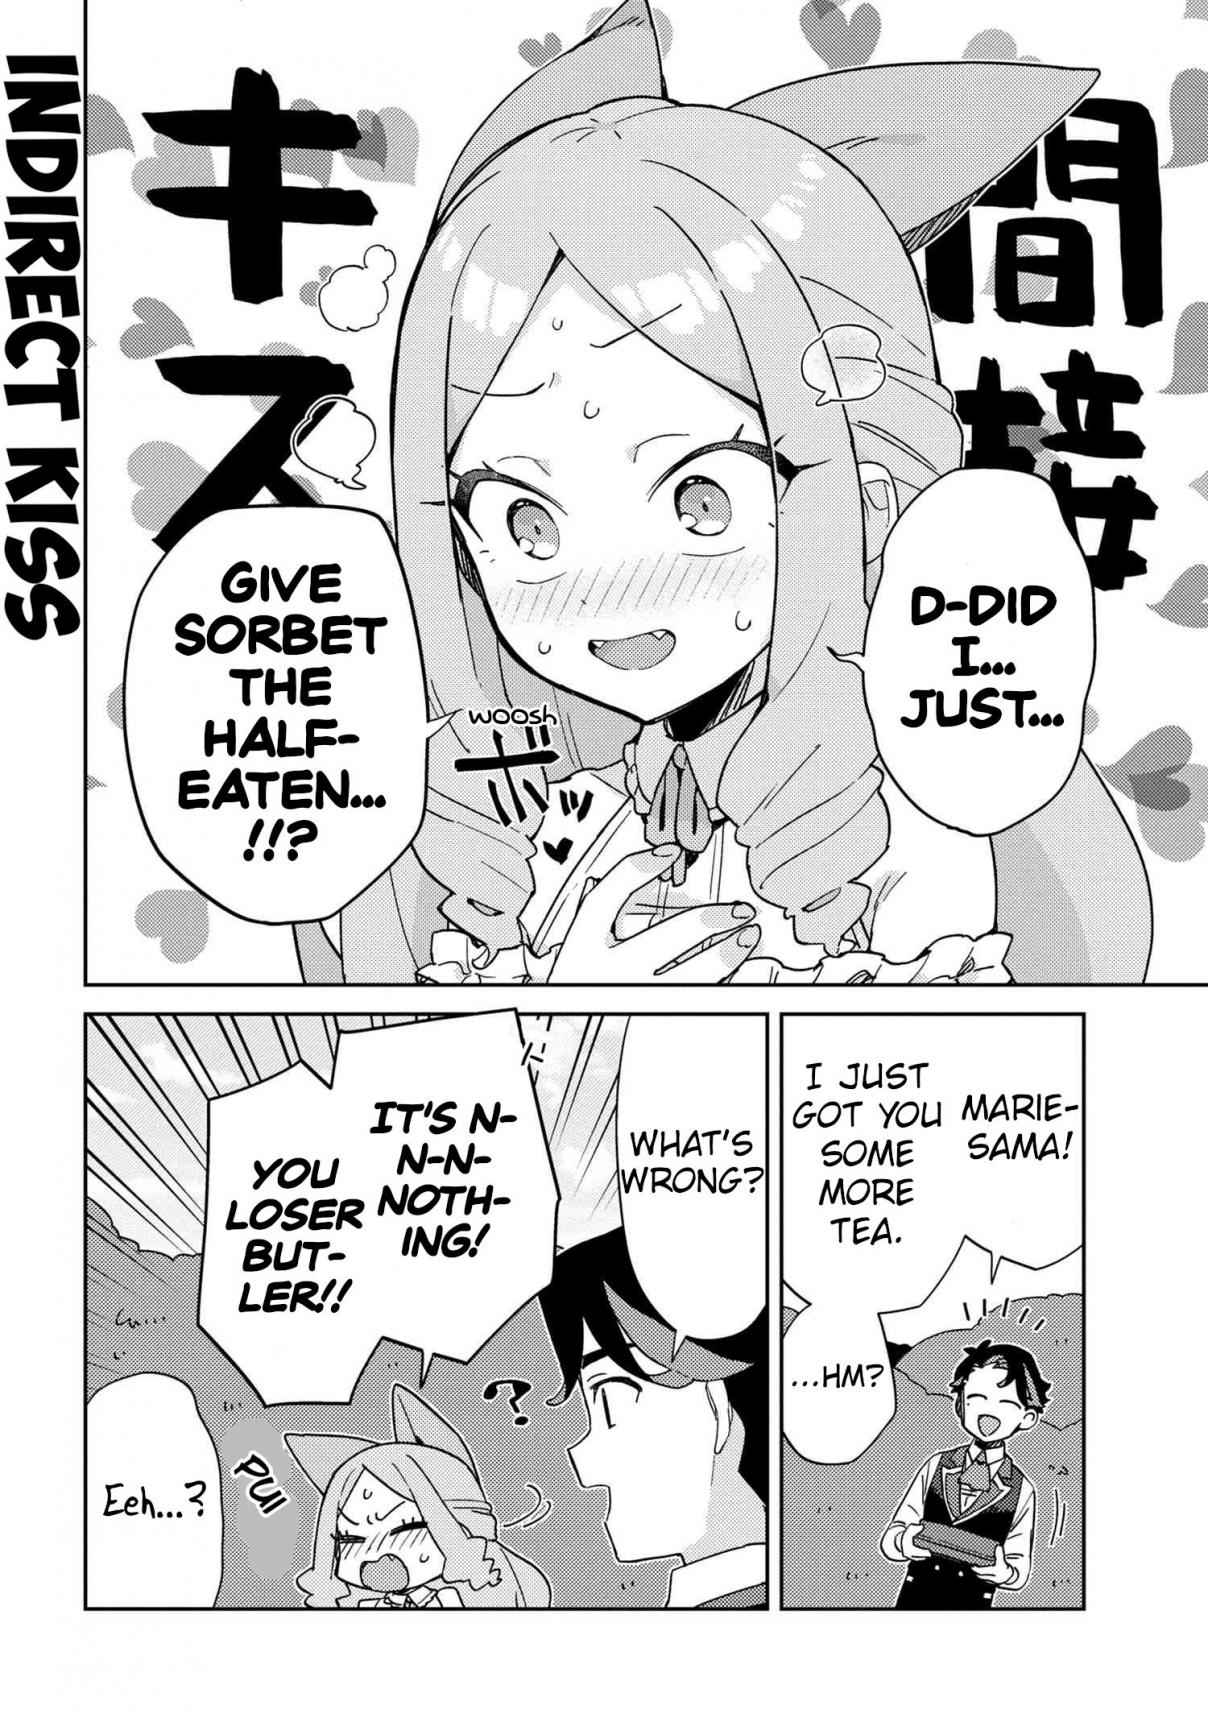 I Want to Teach Marie-sama a Lesson! 11 I Want To Teach Her A Lesson about Stealing Food